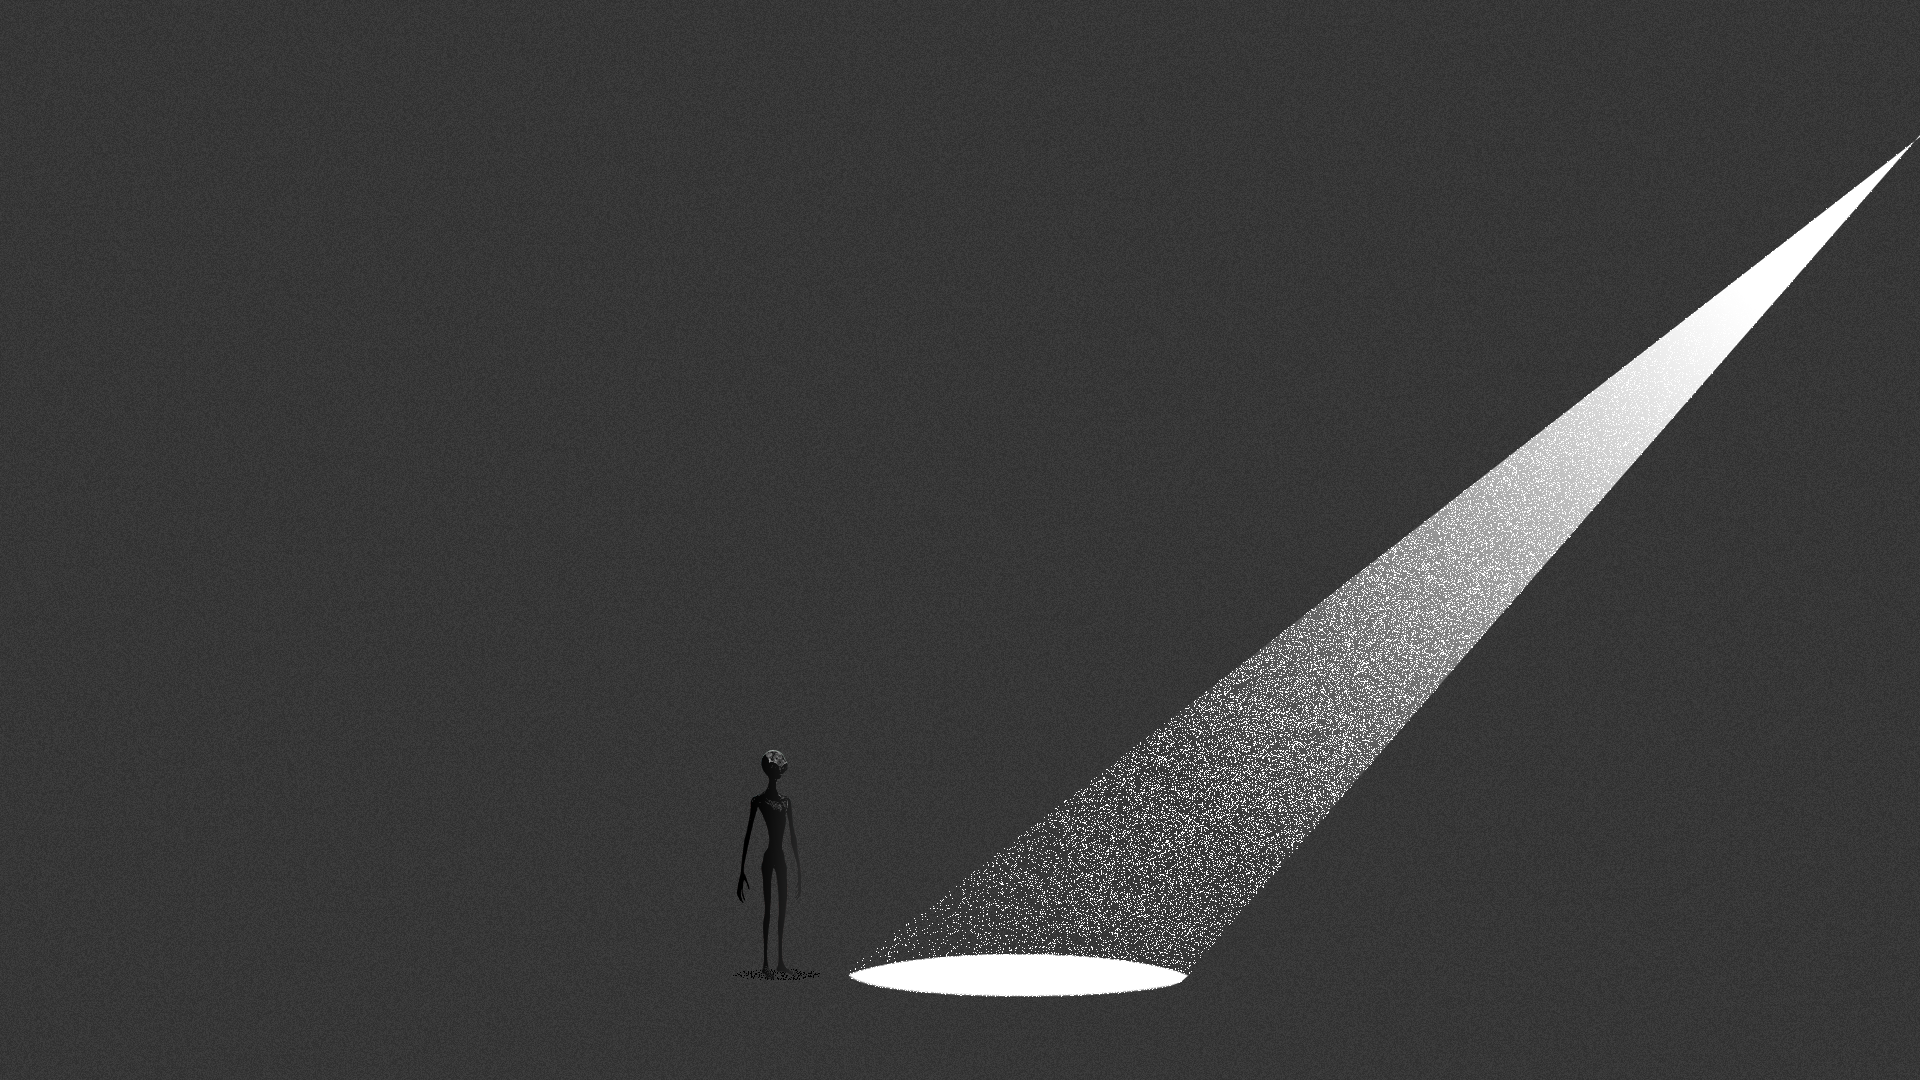 Illustration of a small spotlight lighting an empty area, a small alien is off to the side of the light.